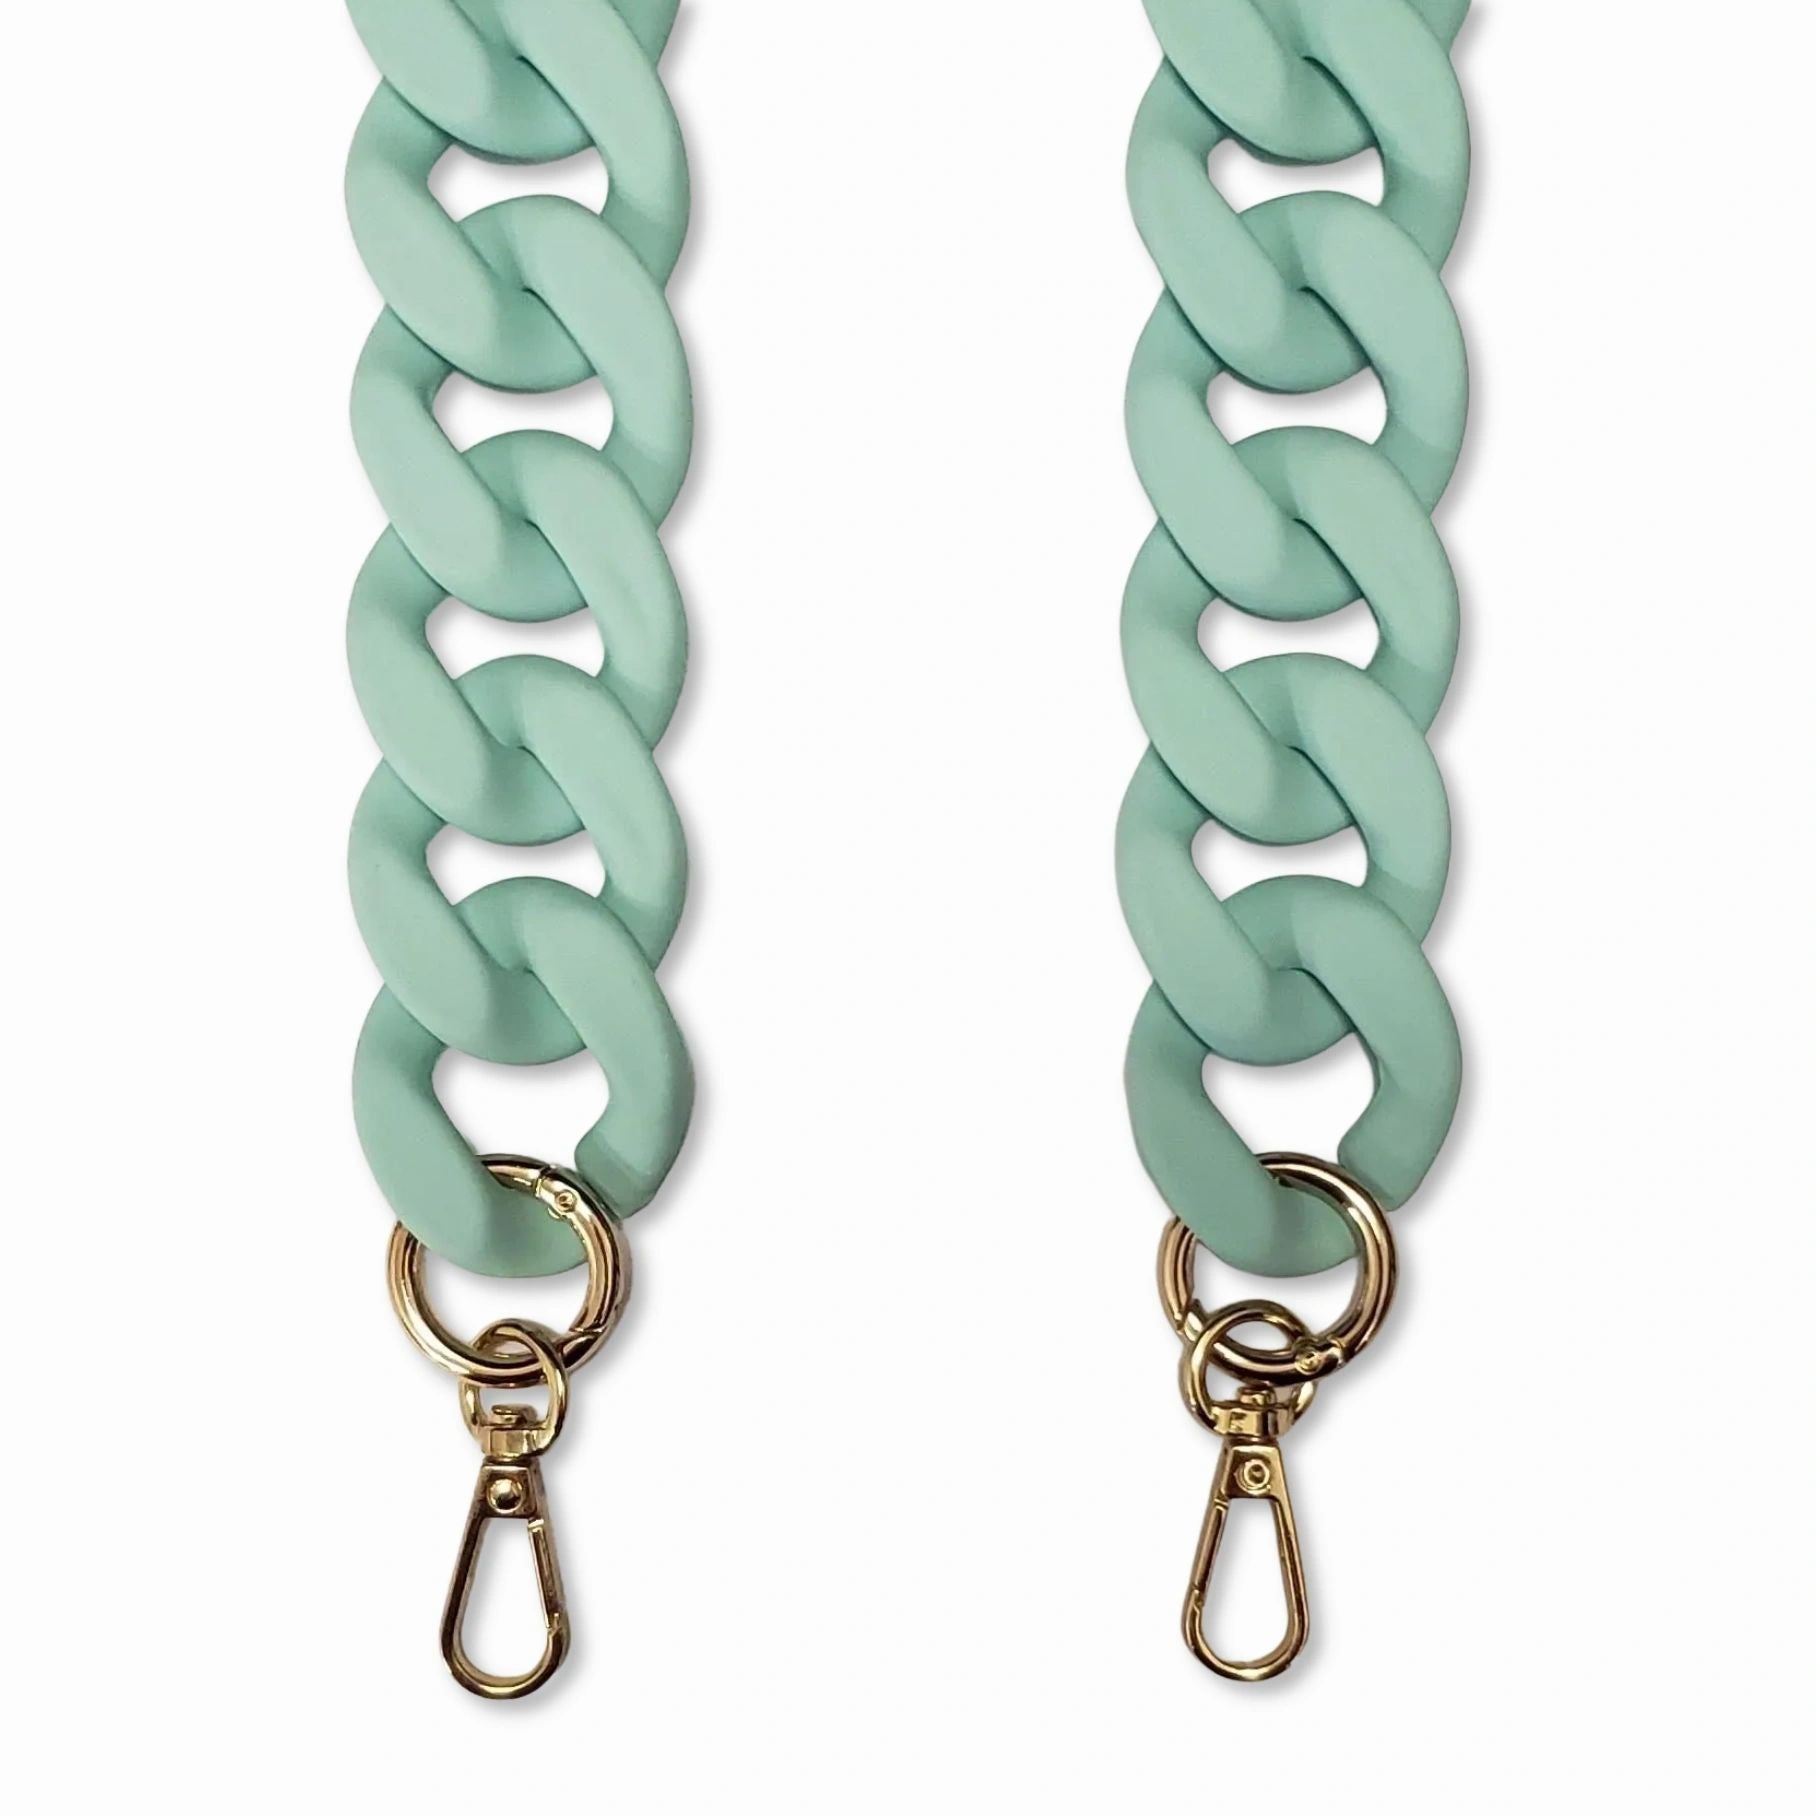 A close-up view of a Mint-colored oval link long phone chain made of matte resin with golden carabiners.